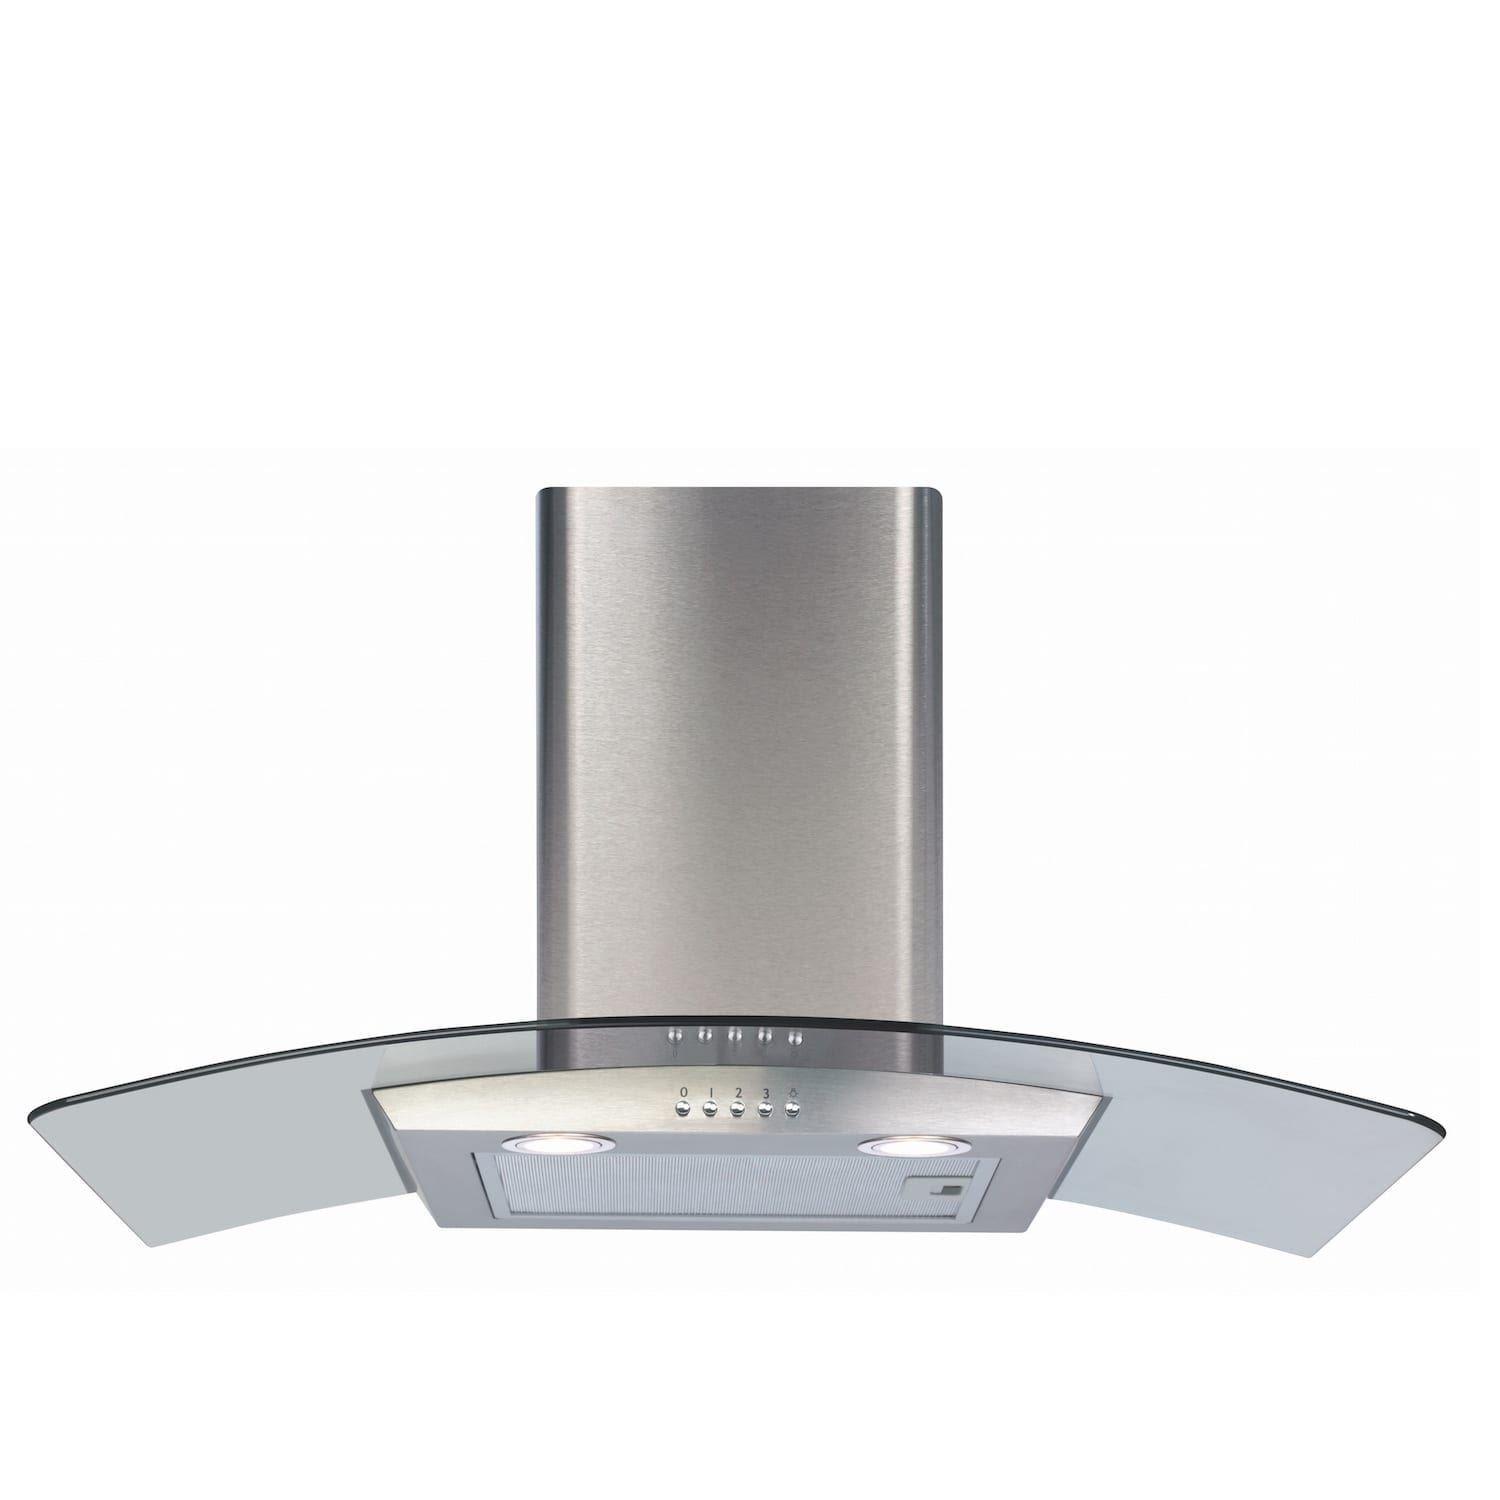 80Cm Stainless Steel Curved Glass Chimney Cooker Hood Extractor Fan-Ecp82ss